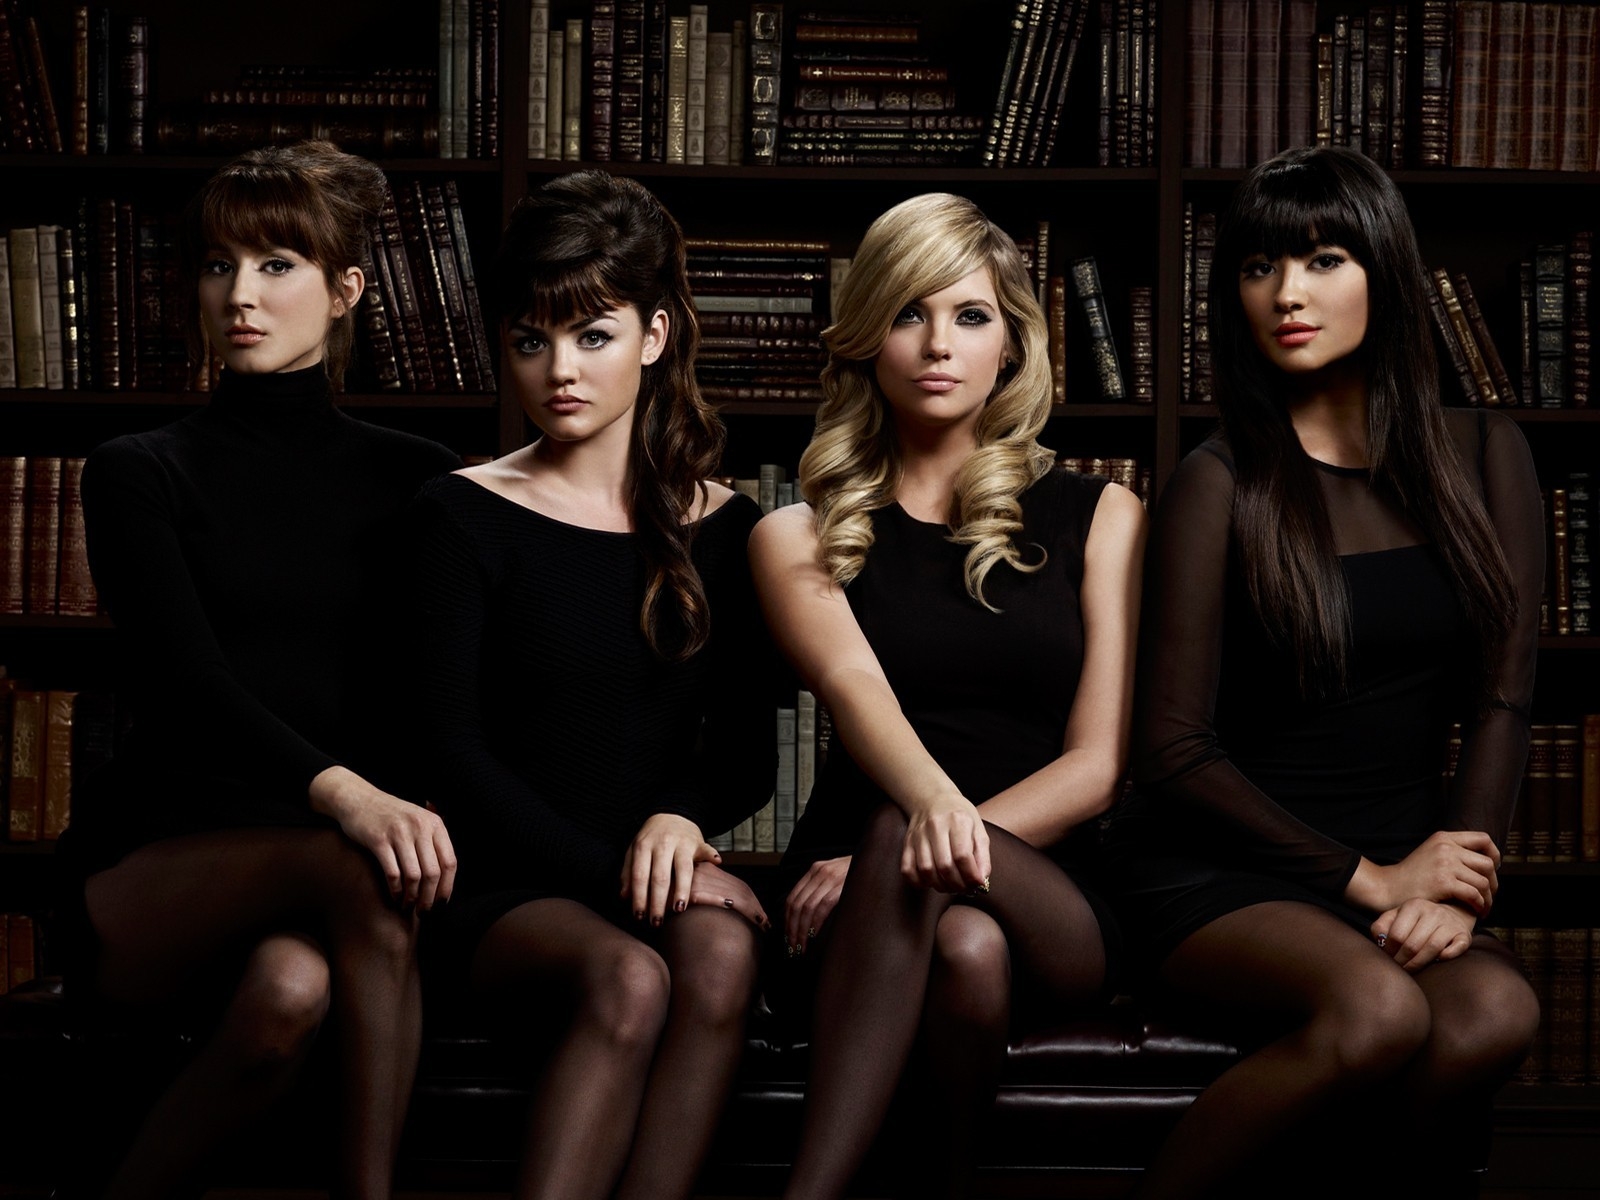 Pretty Little Liars Poster for 1600 x 1200 resolution